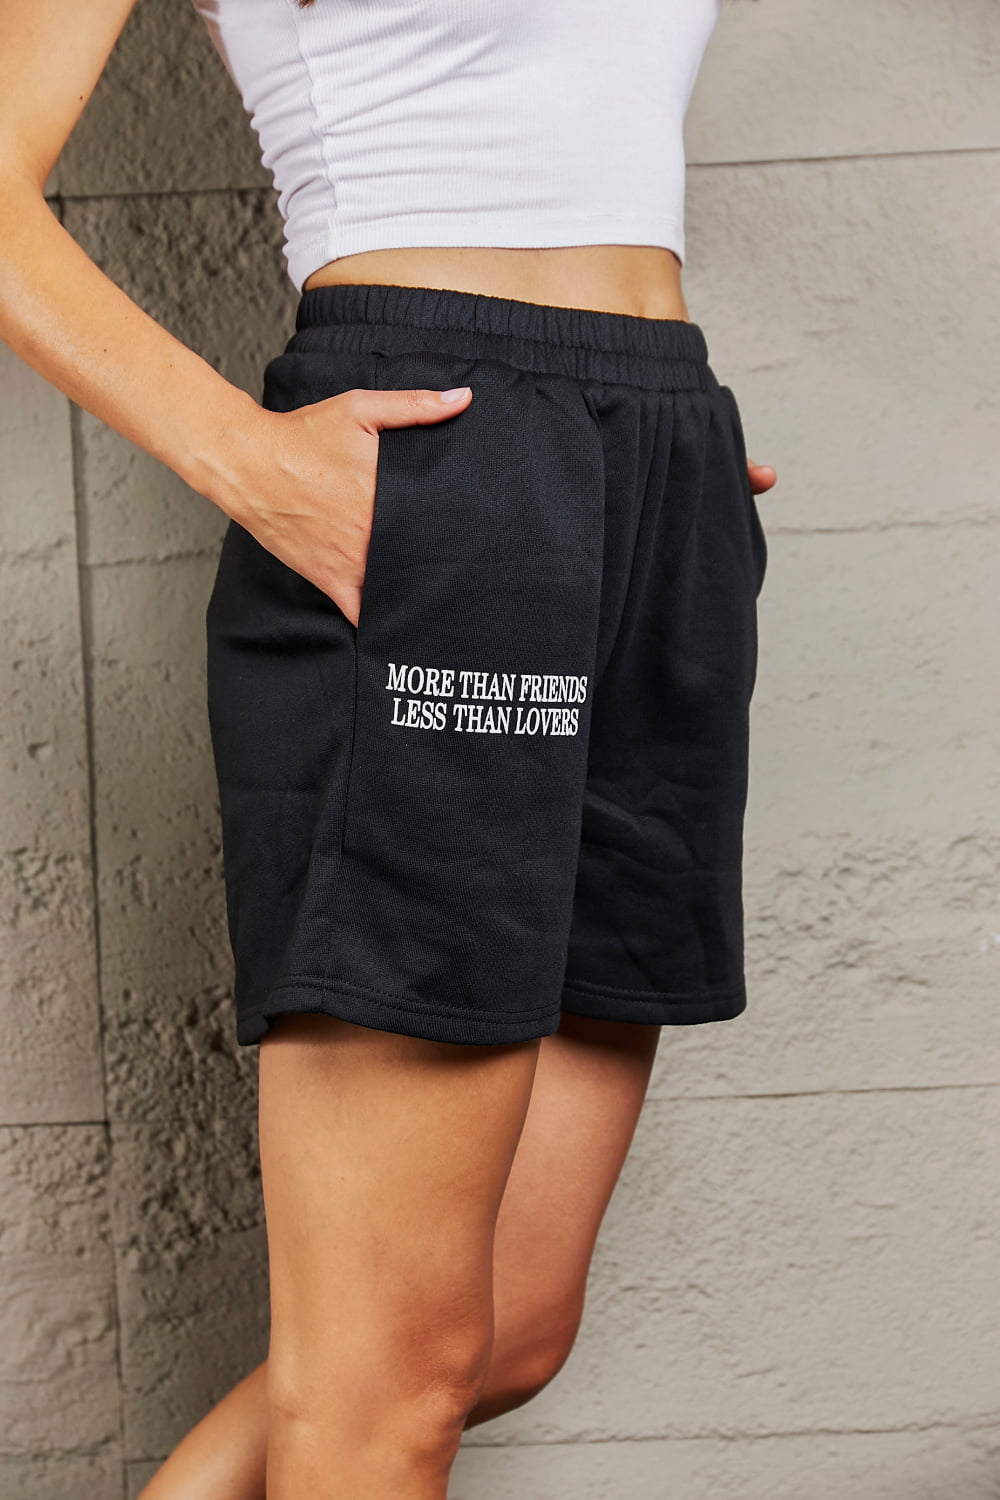 MORE THAN FRIENDS LESS THAN LOVERS Shorts - Women’s Clothing & Accessories - Shorts - 5 - 2024